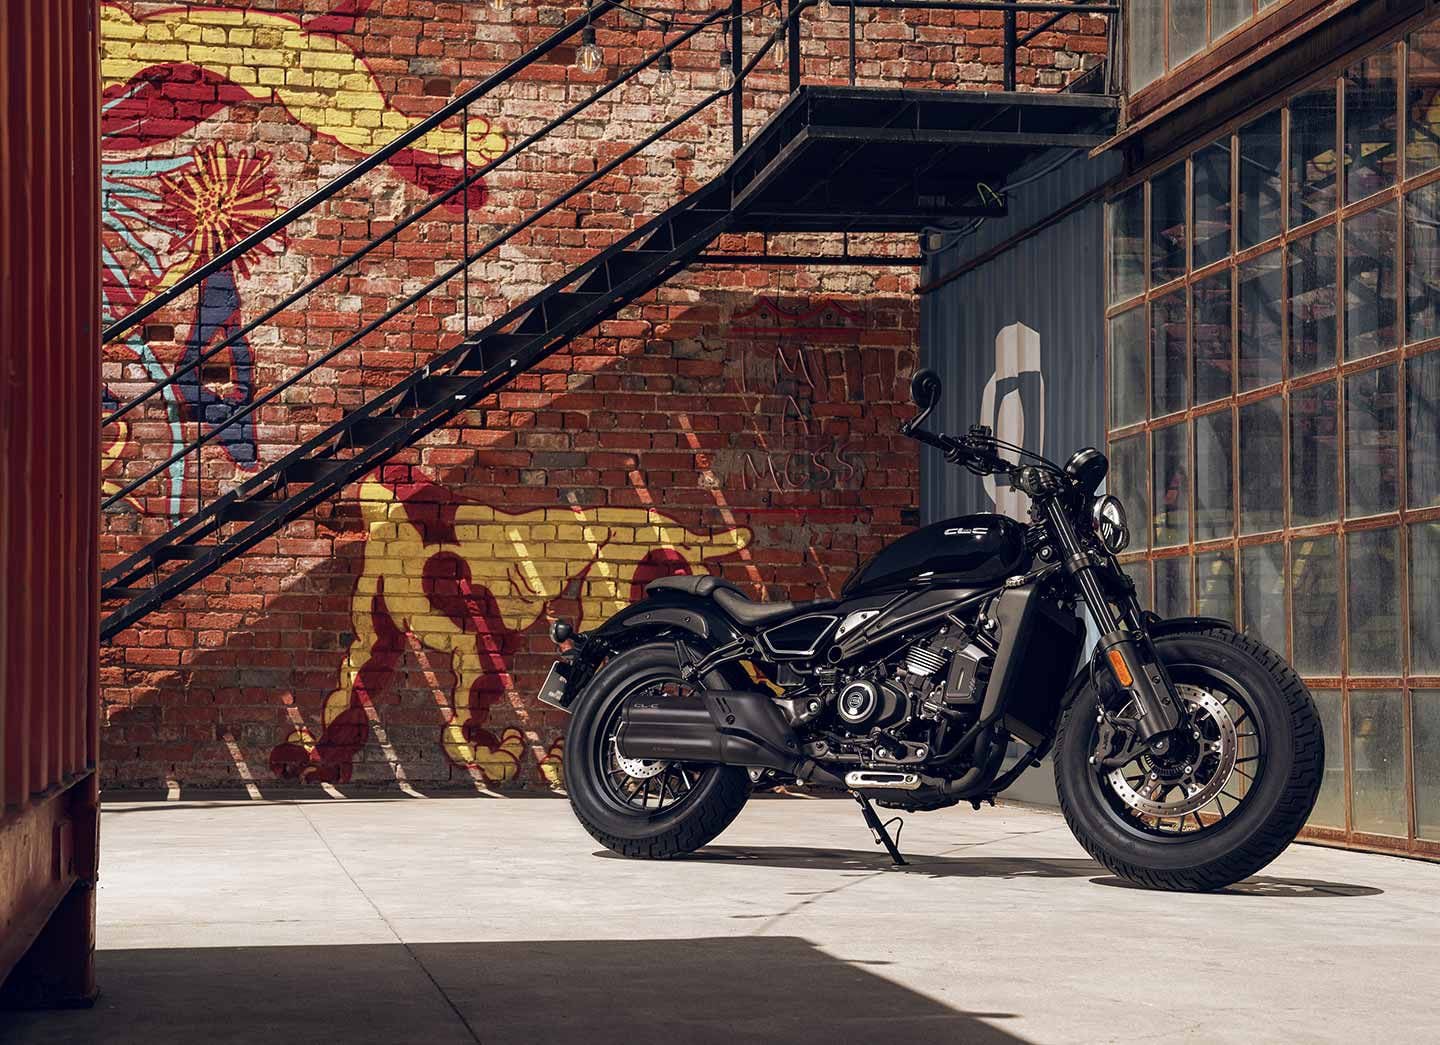 The 450CL-C has a classic cruiser stance. Nice details include a cool fender mount and bar-end mirrors.